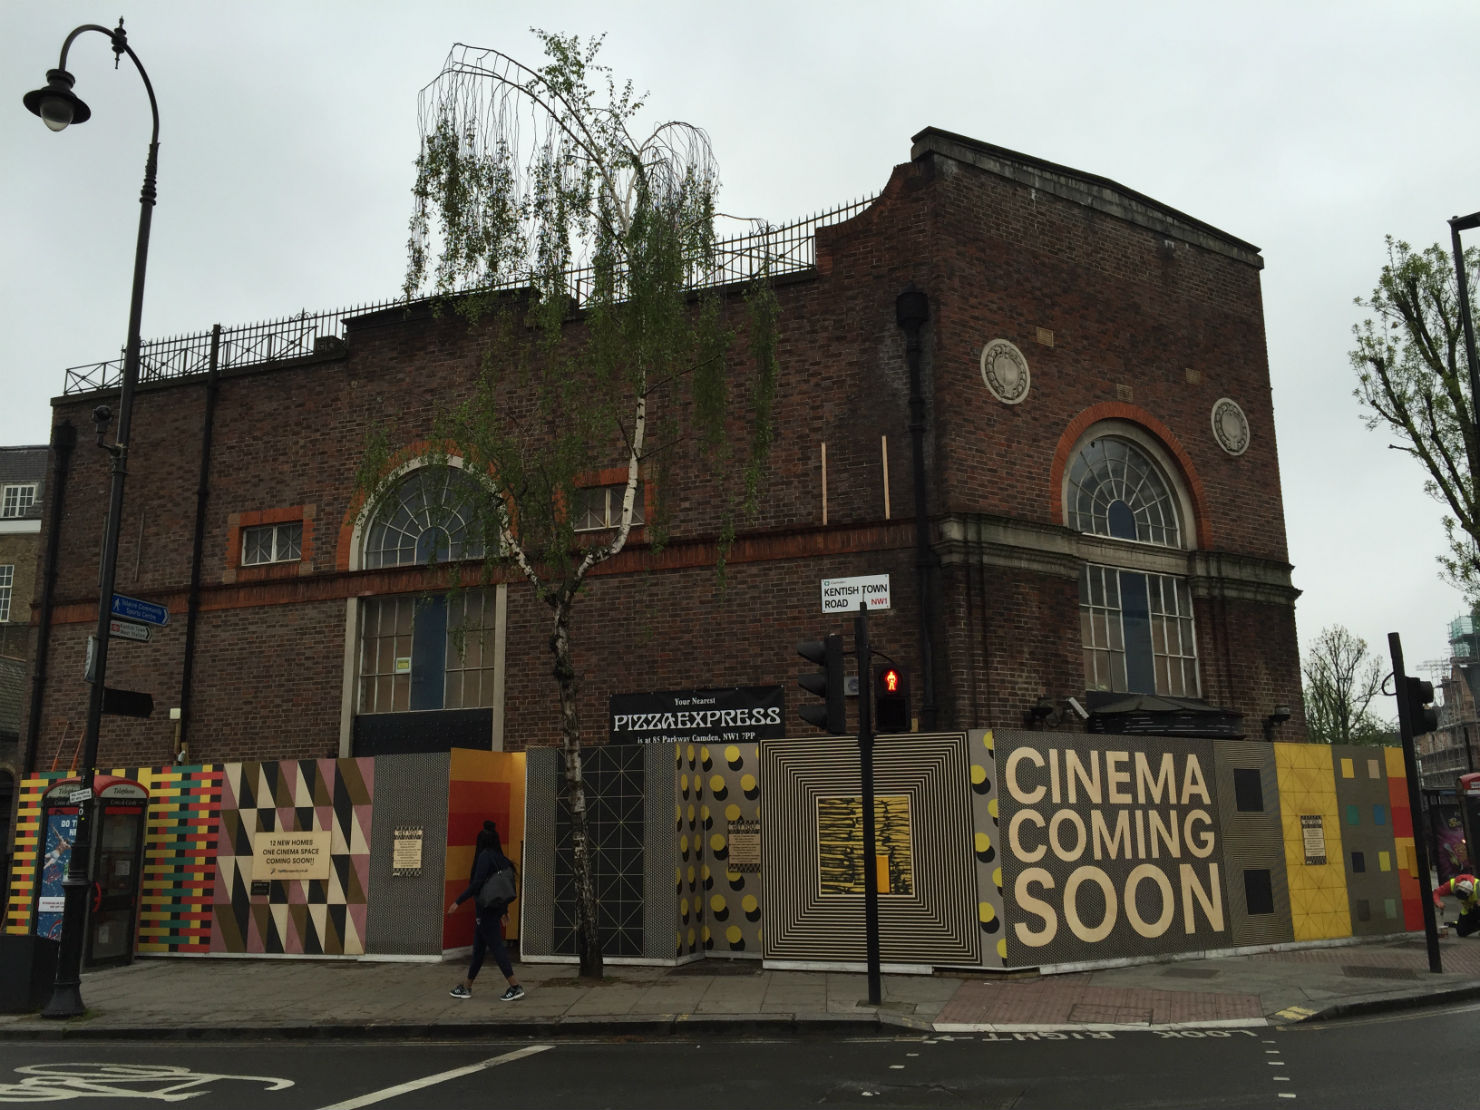 Nearly there? The cinema will open within the next six months. Photo: SE